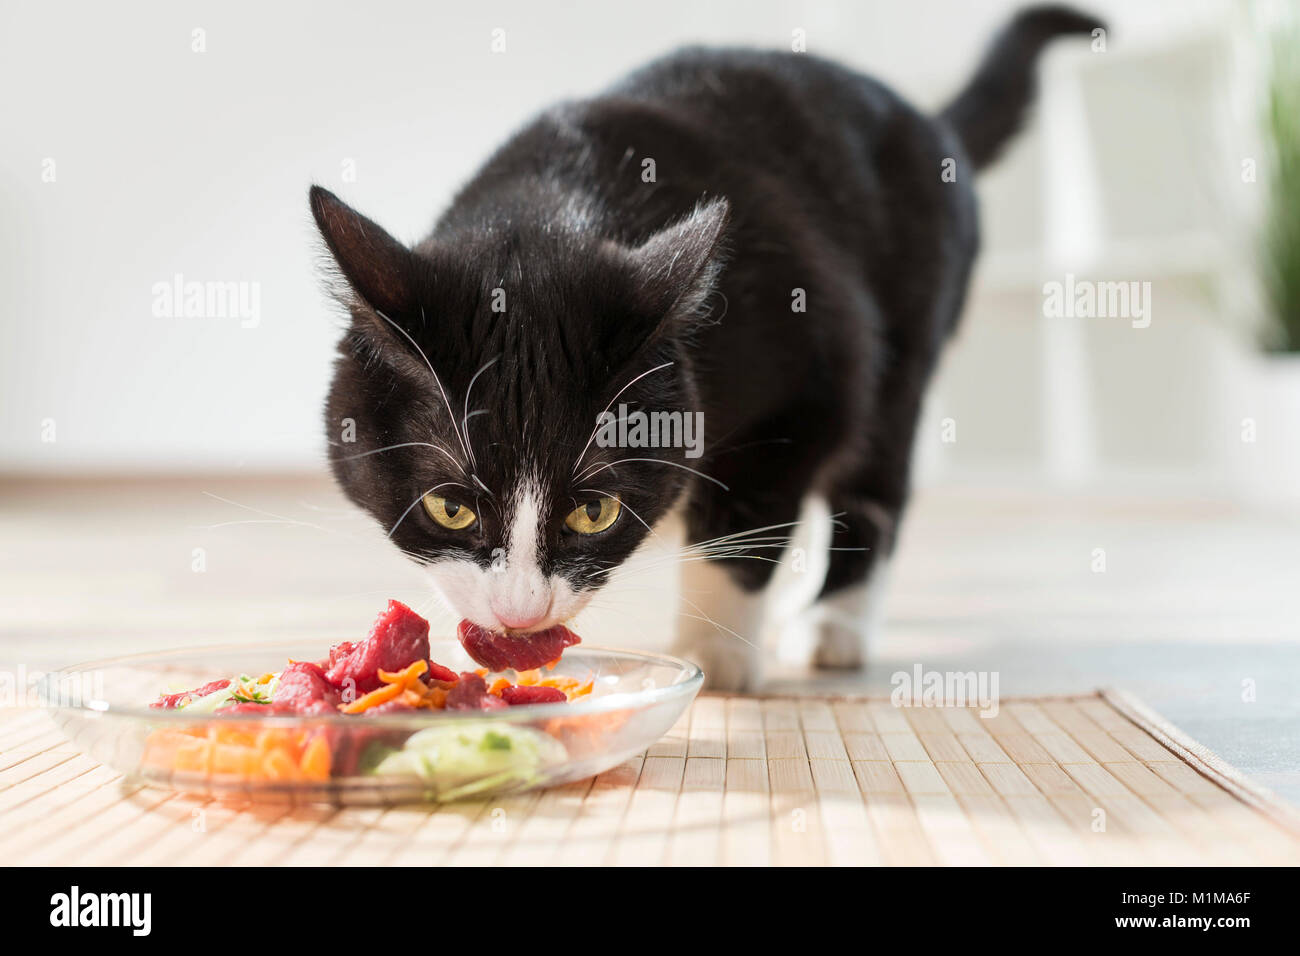 Domestic cat. Juvenile eating raw meat and vegetables (BARF) from a glass dish. Germany Stock Photo